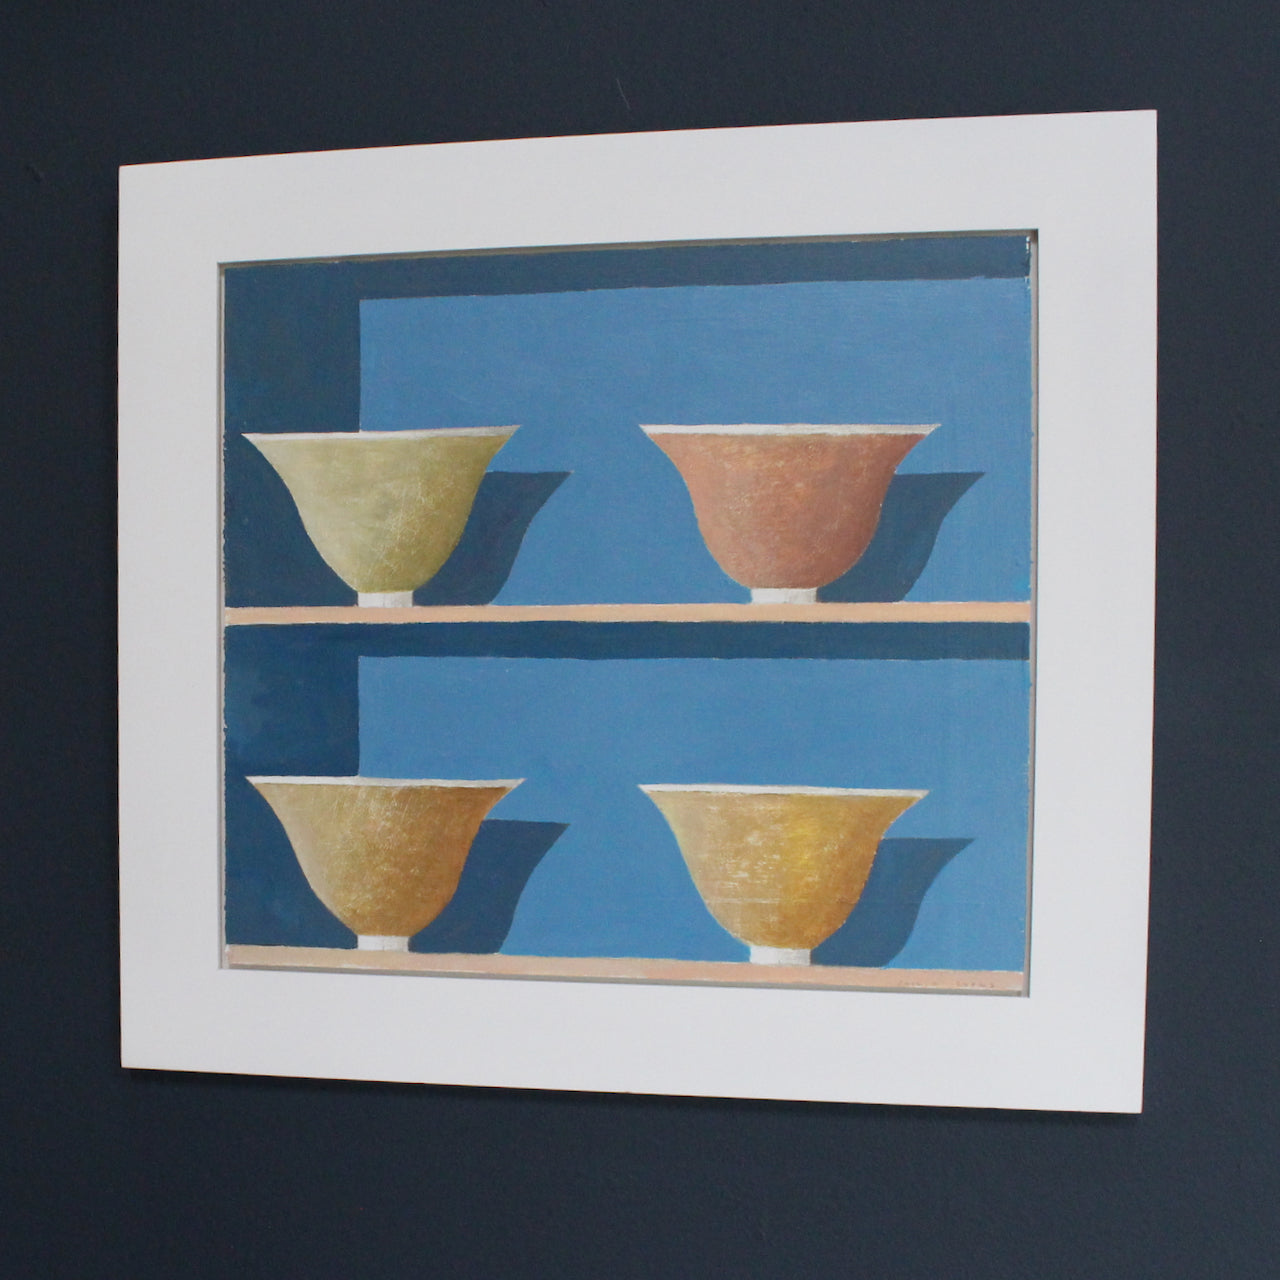 a framed painting of four bowls in yellows and reds on two shelves against a blue wall  it is by Cornish artist Philip Lyons.